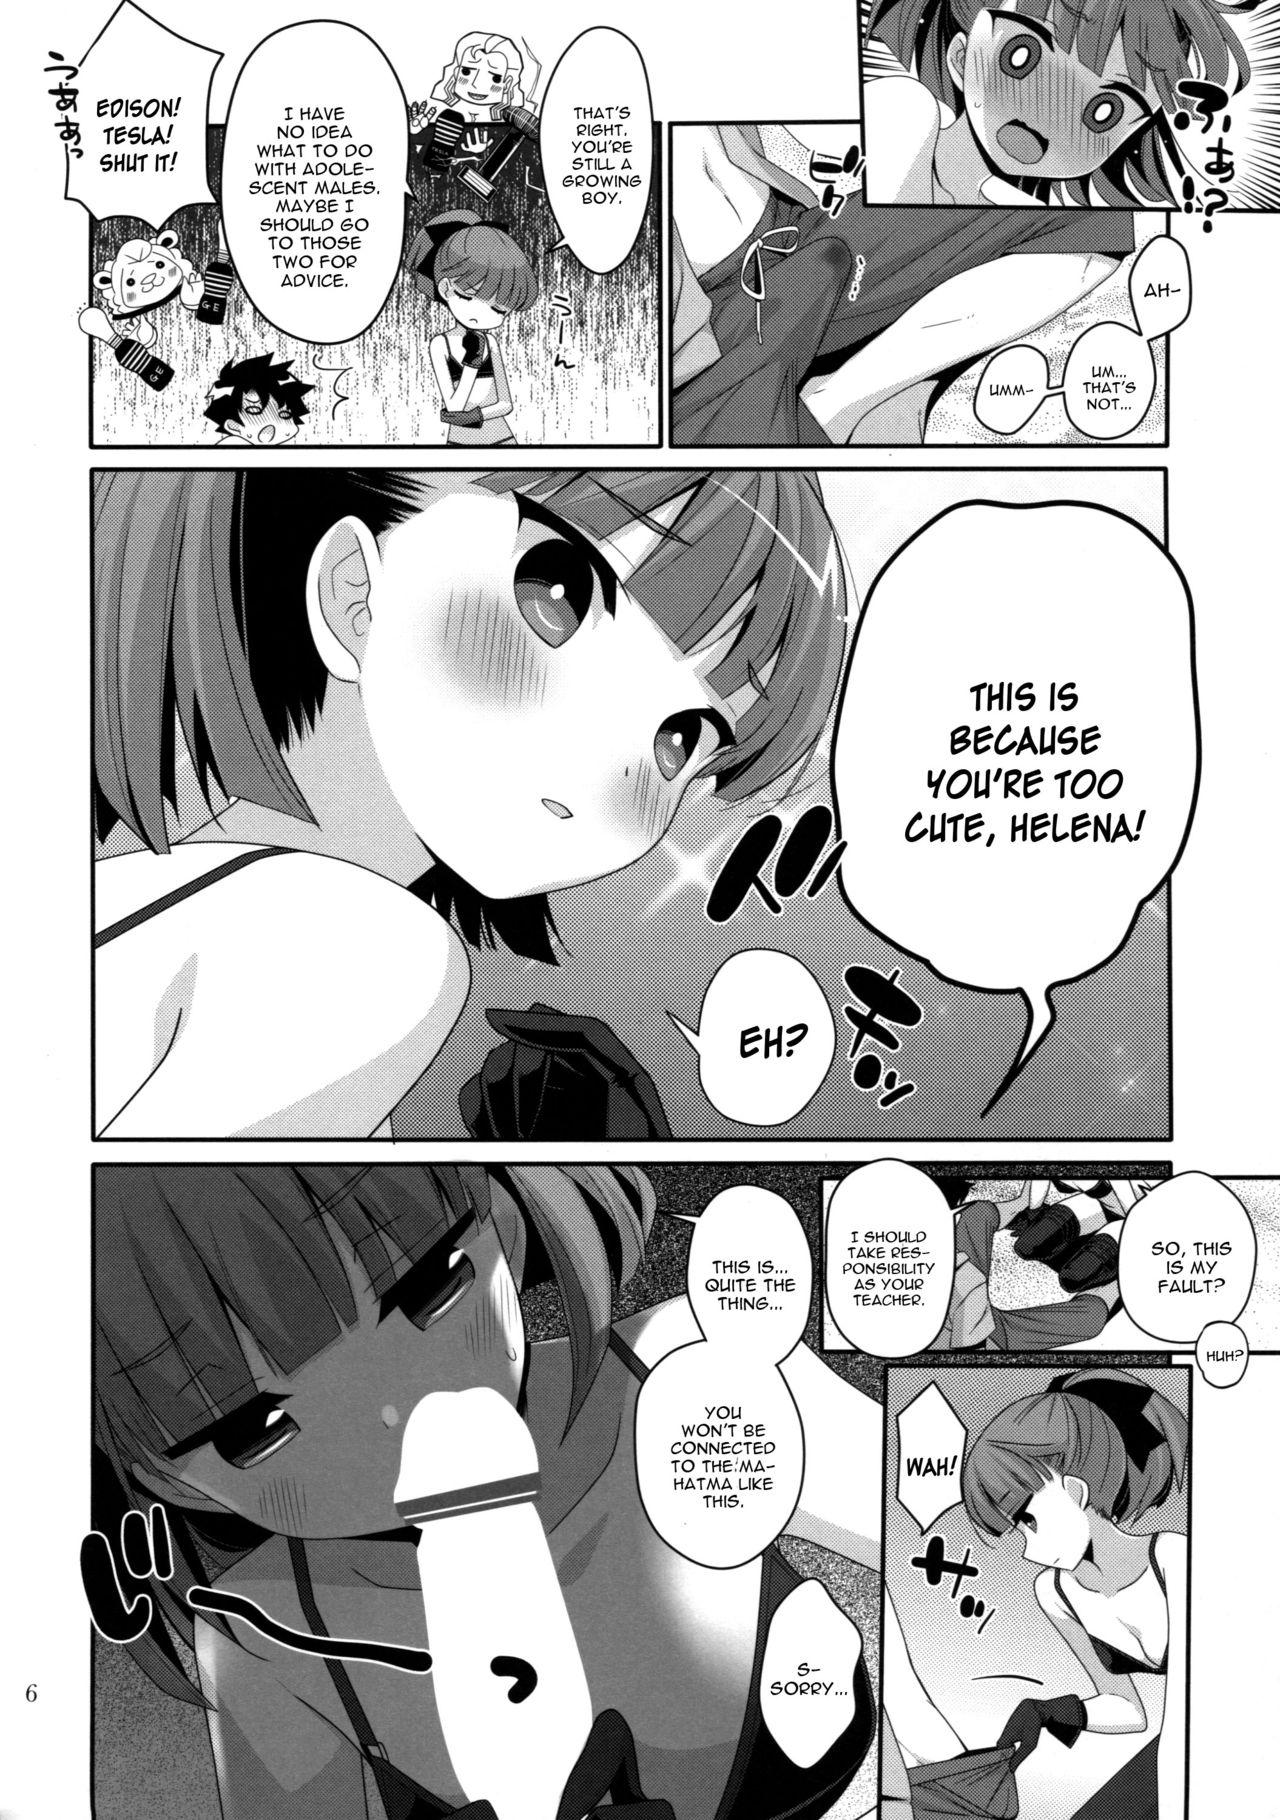 Free Blowjobs Angel Number 333 - Fate grand order Free Teenage Porn - Page 5